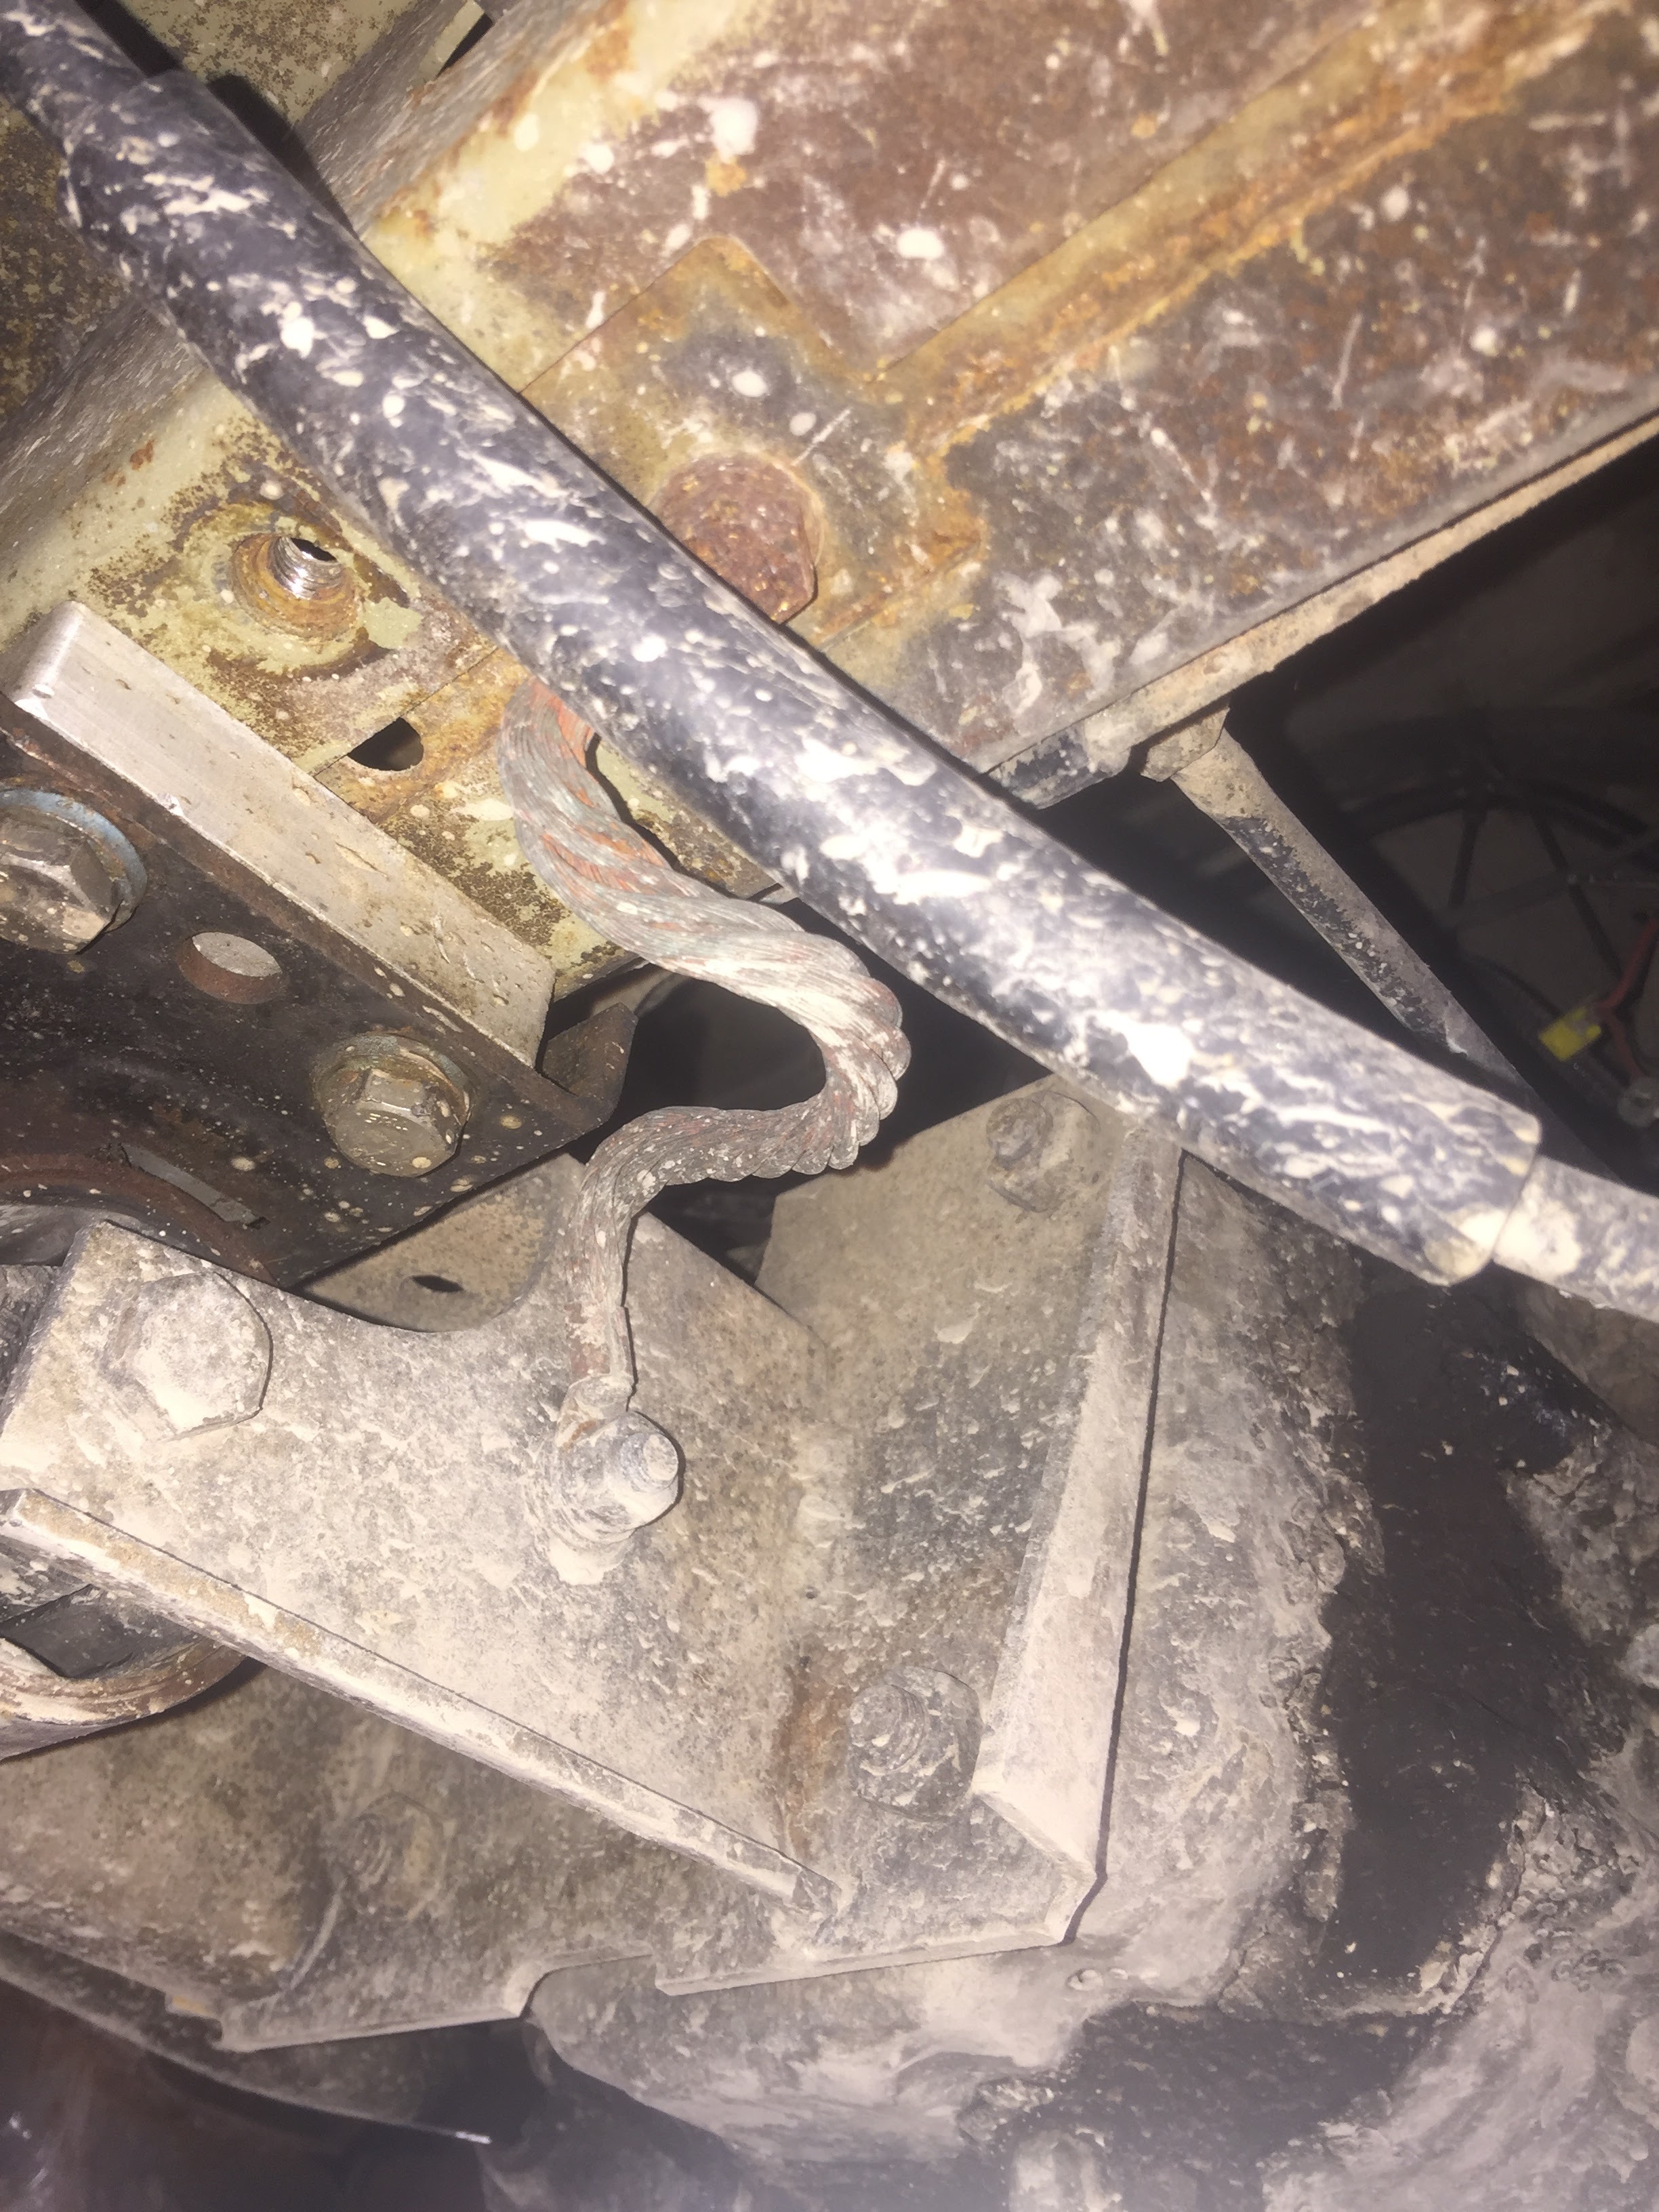 Transmission Ground Strap Replacement